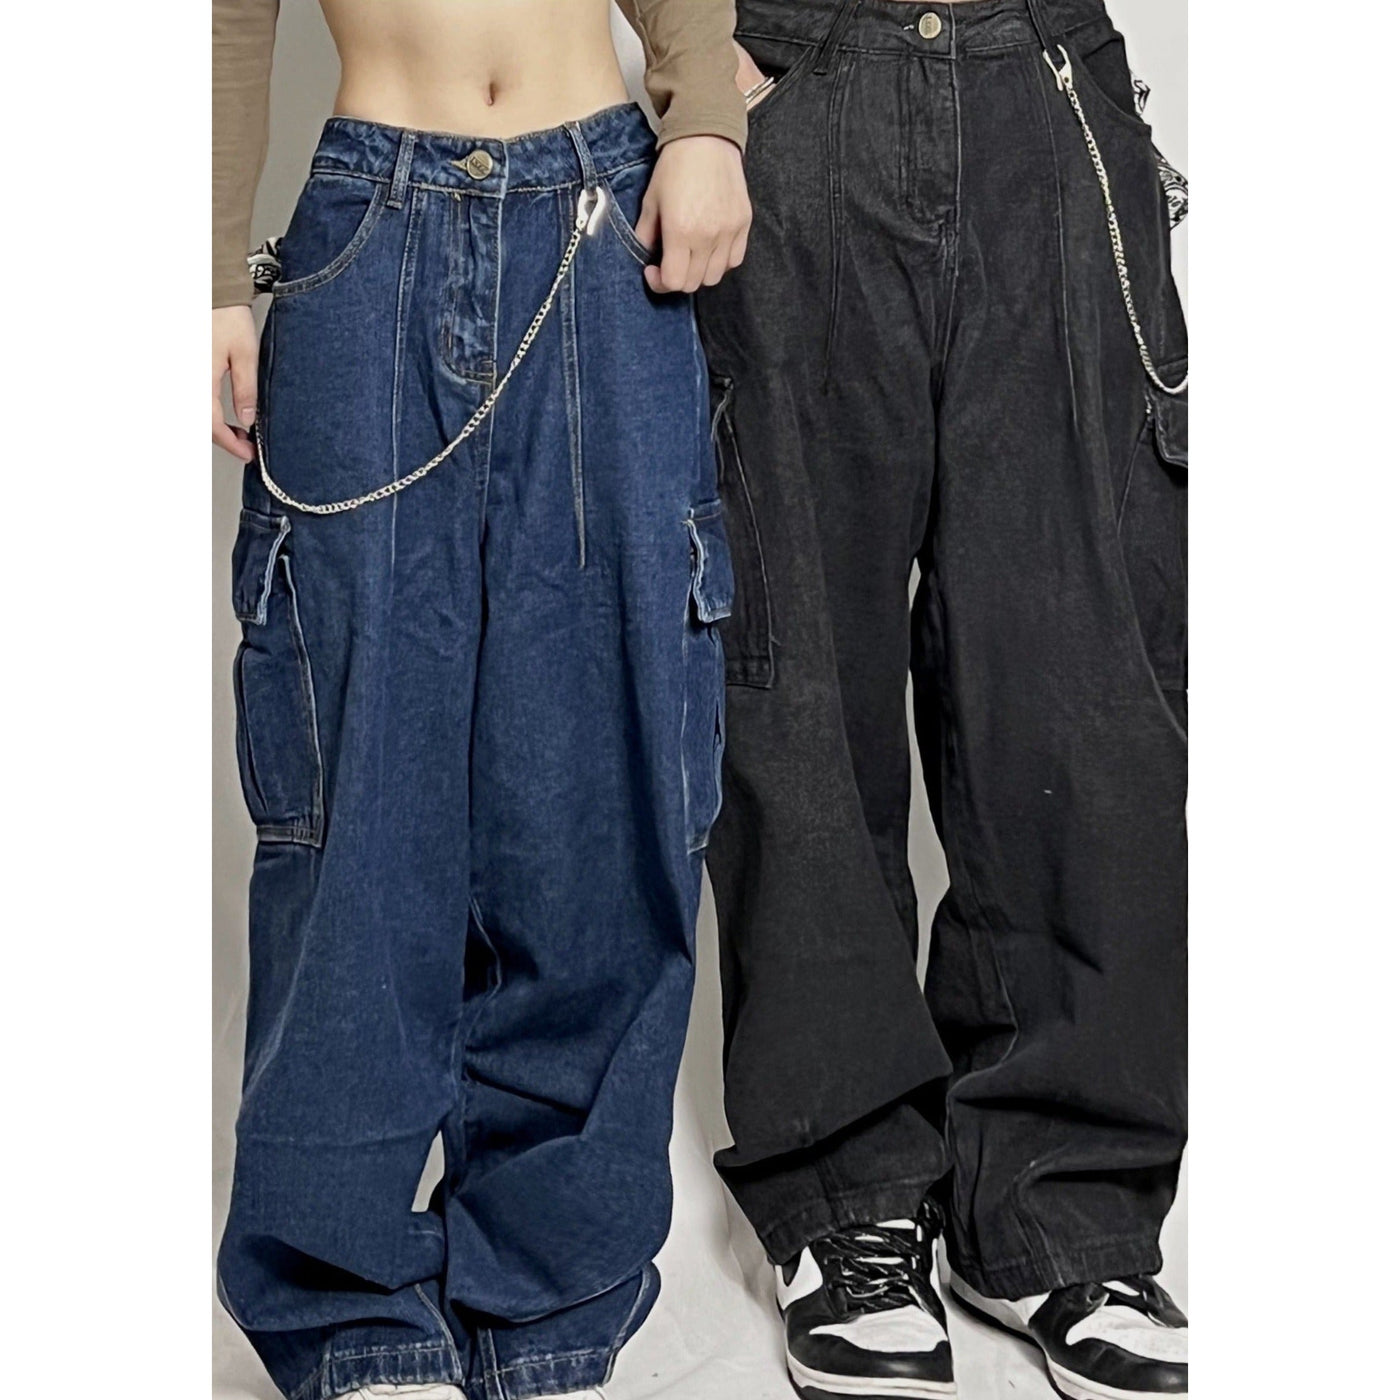 Made Extreme Chain Detail Cargo Pants Korean Street Fashion Pants By Made Extreme Shop Online at OH Vault